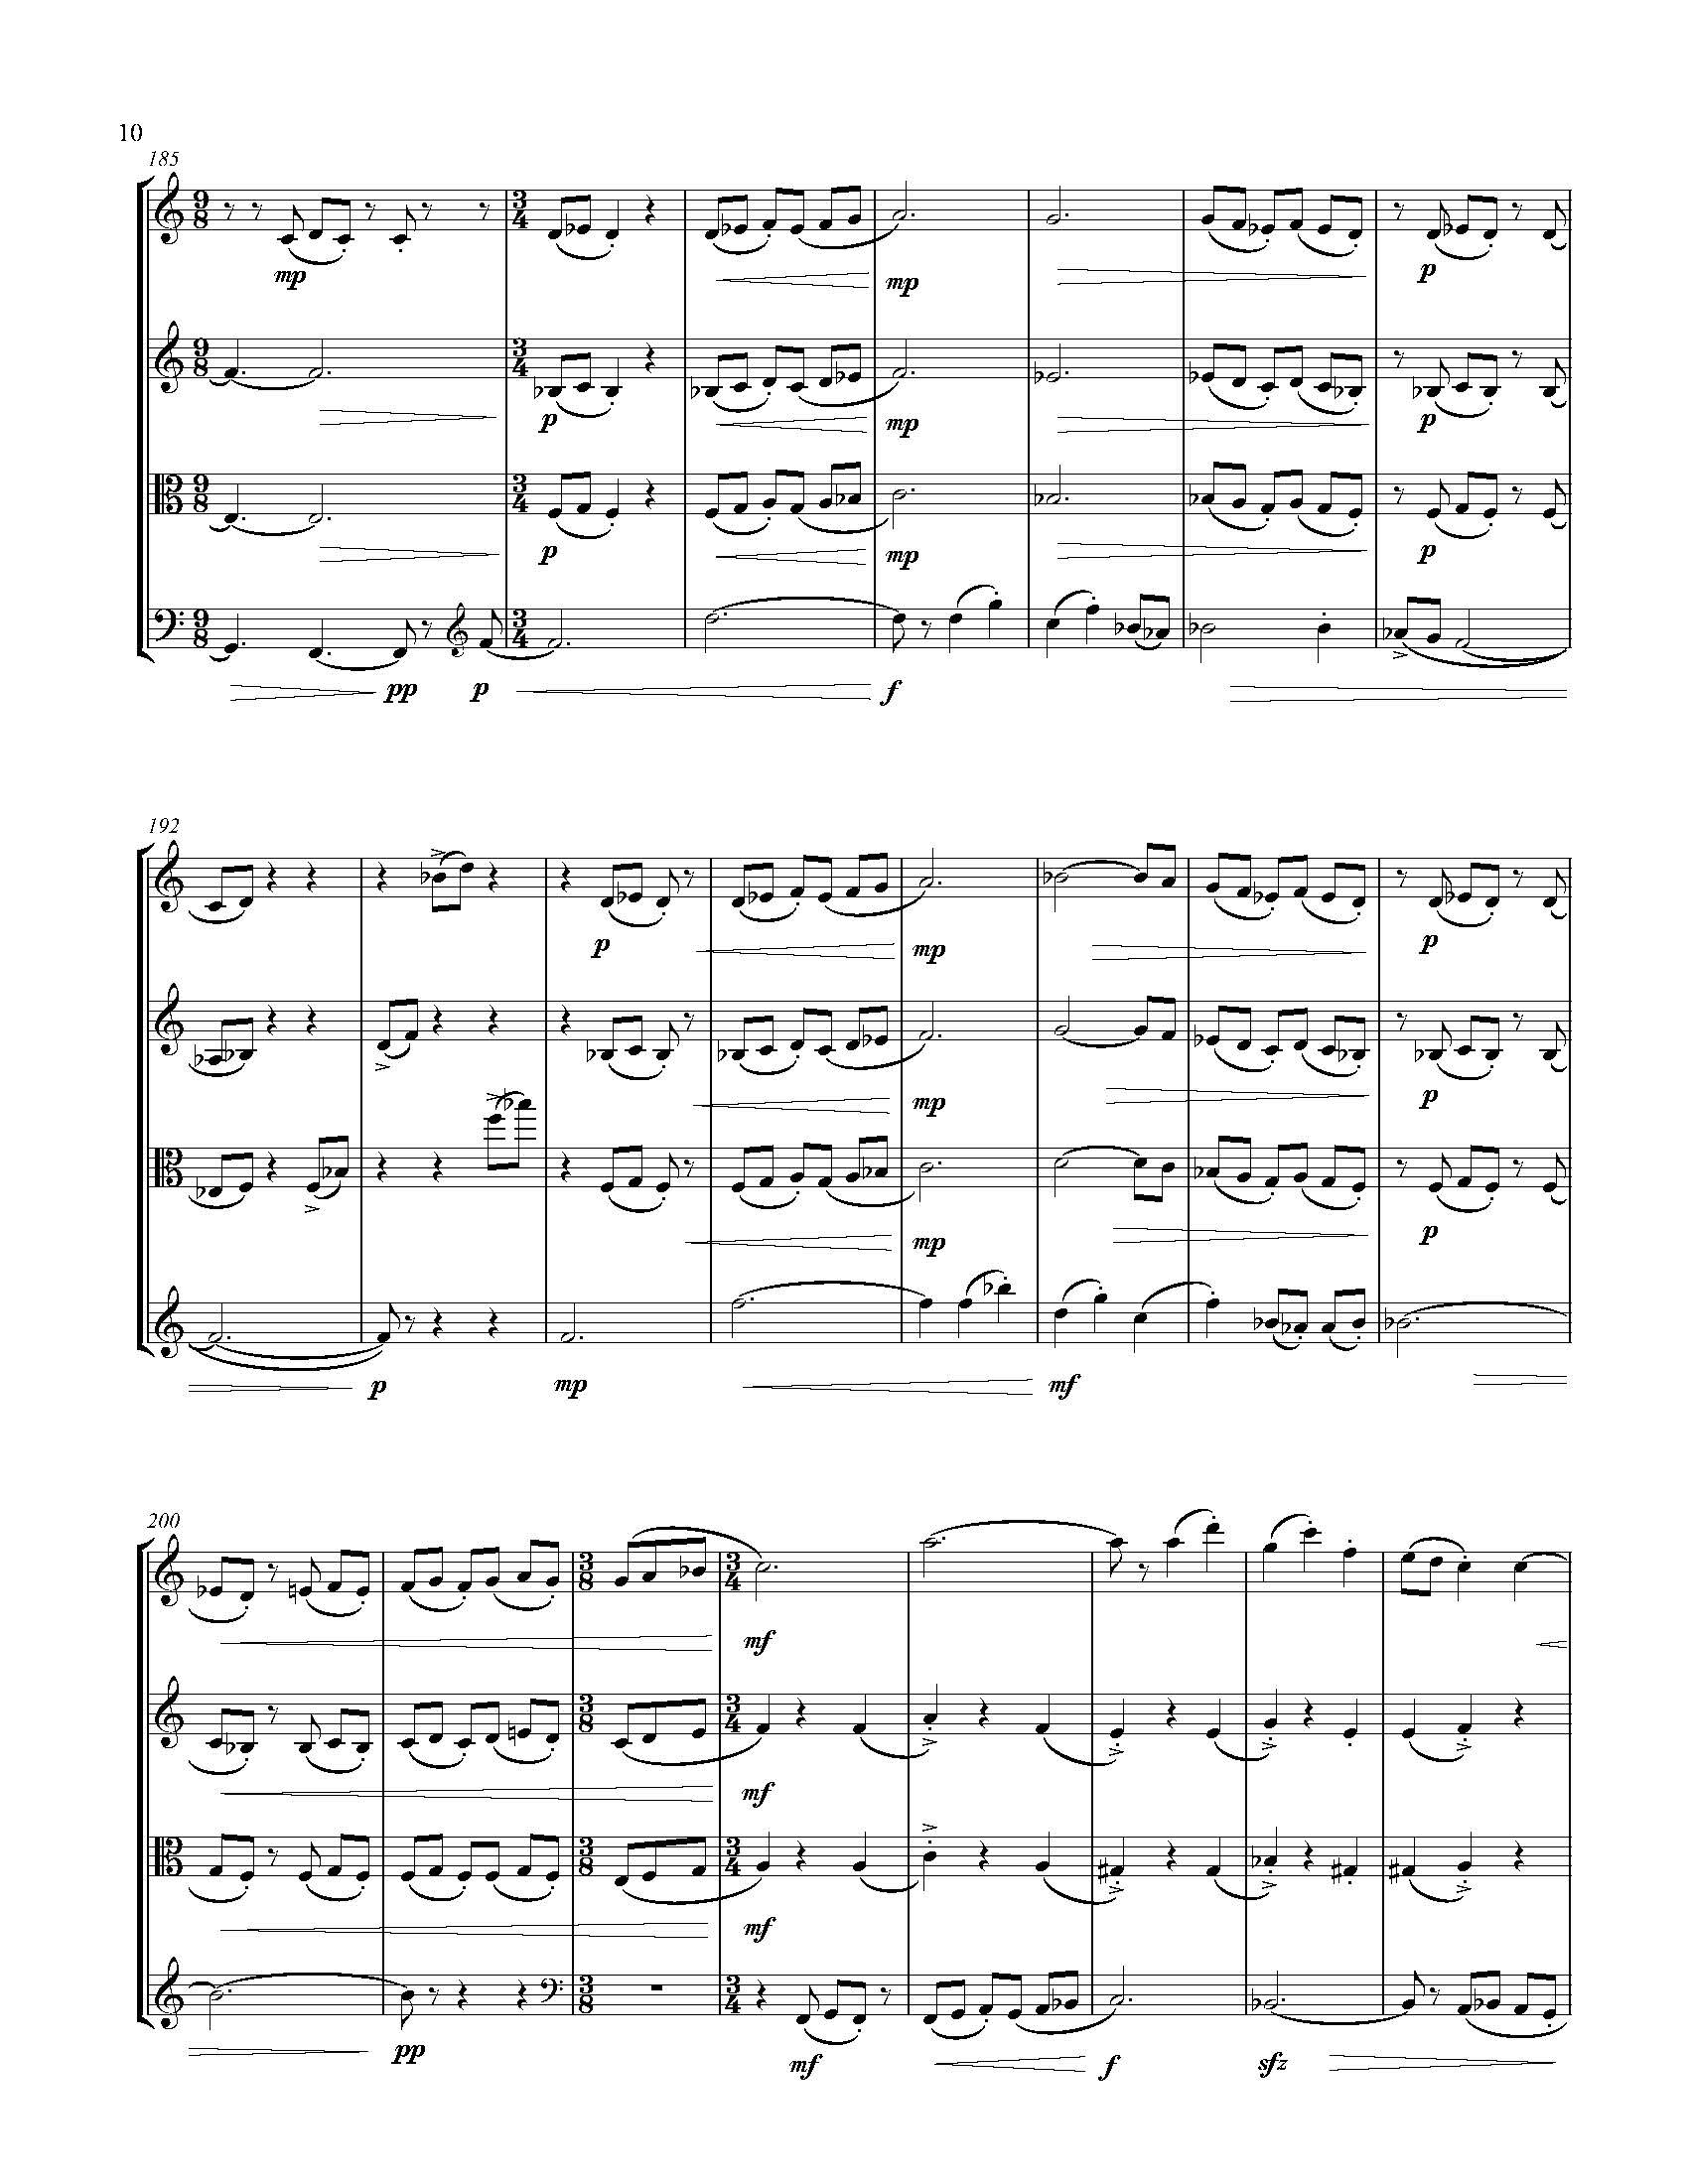 A Country of Vast Designs - Complete Score_Page_16.jpg